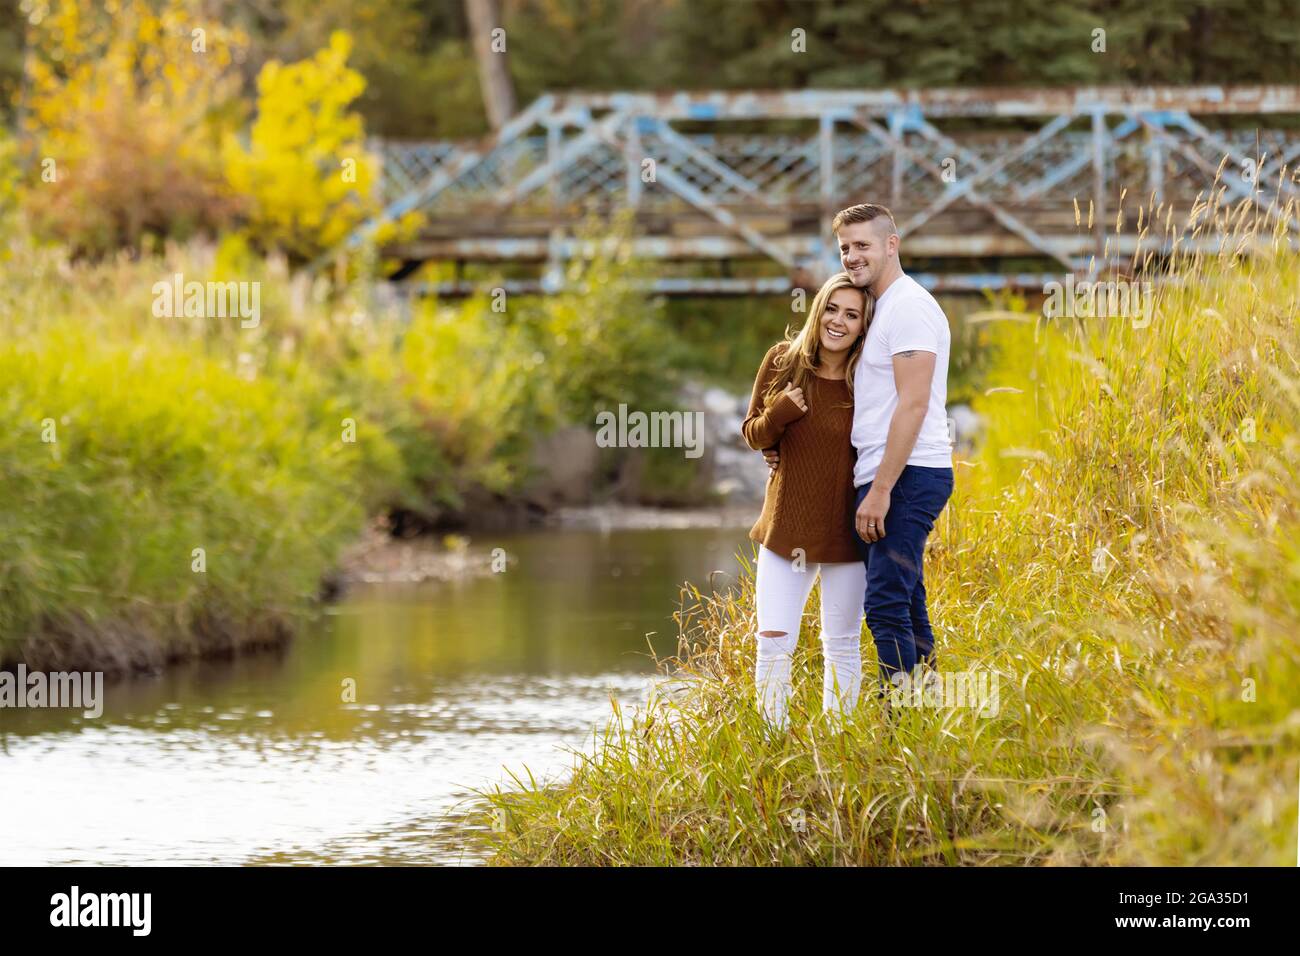 Husband and wife spending quality time together outdoors near a stream in a city park; Edmonton, Alberta, Canada Stock Photo